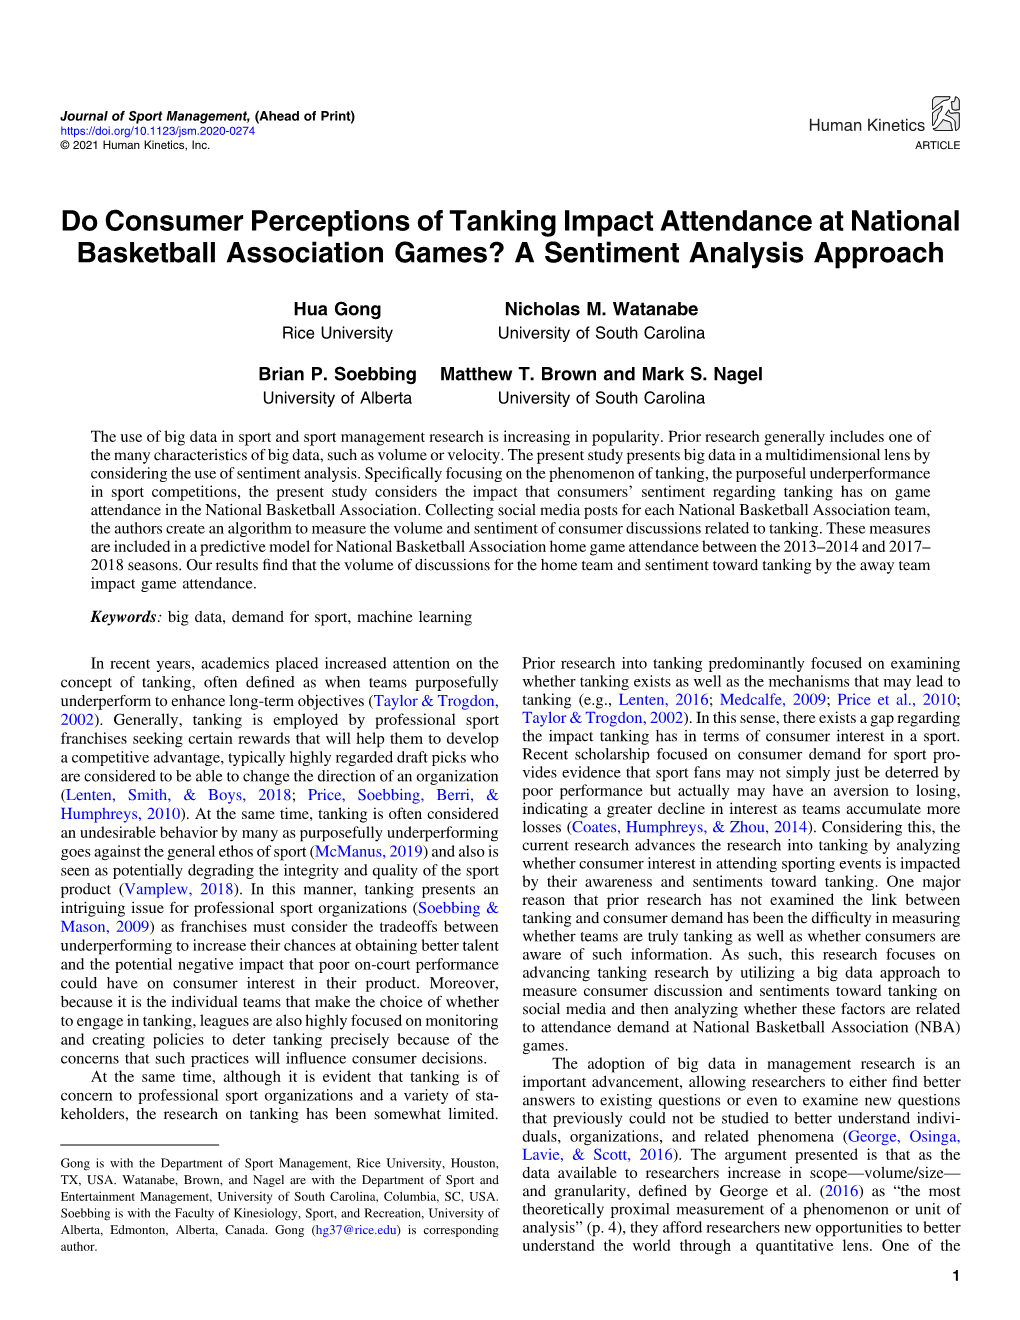 Do Consumer Perceptions of Tanking Impact Attendance at National Basketball Association Games? a Sentiment Analysis Approach